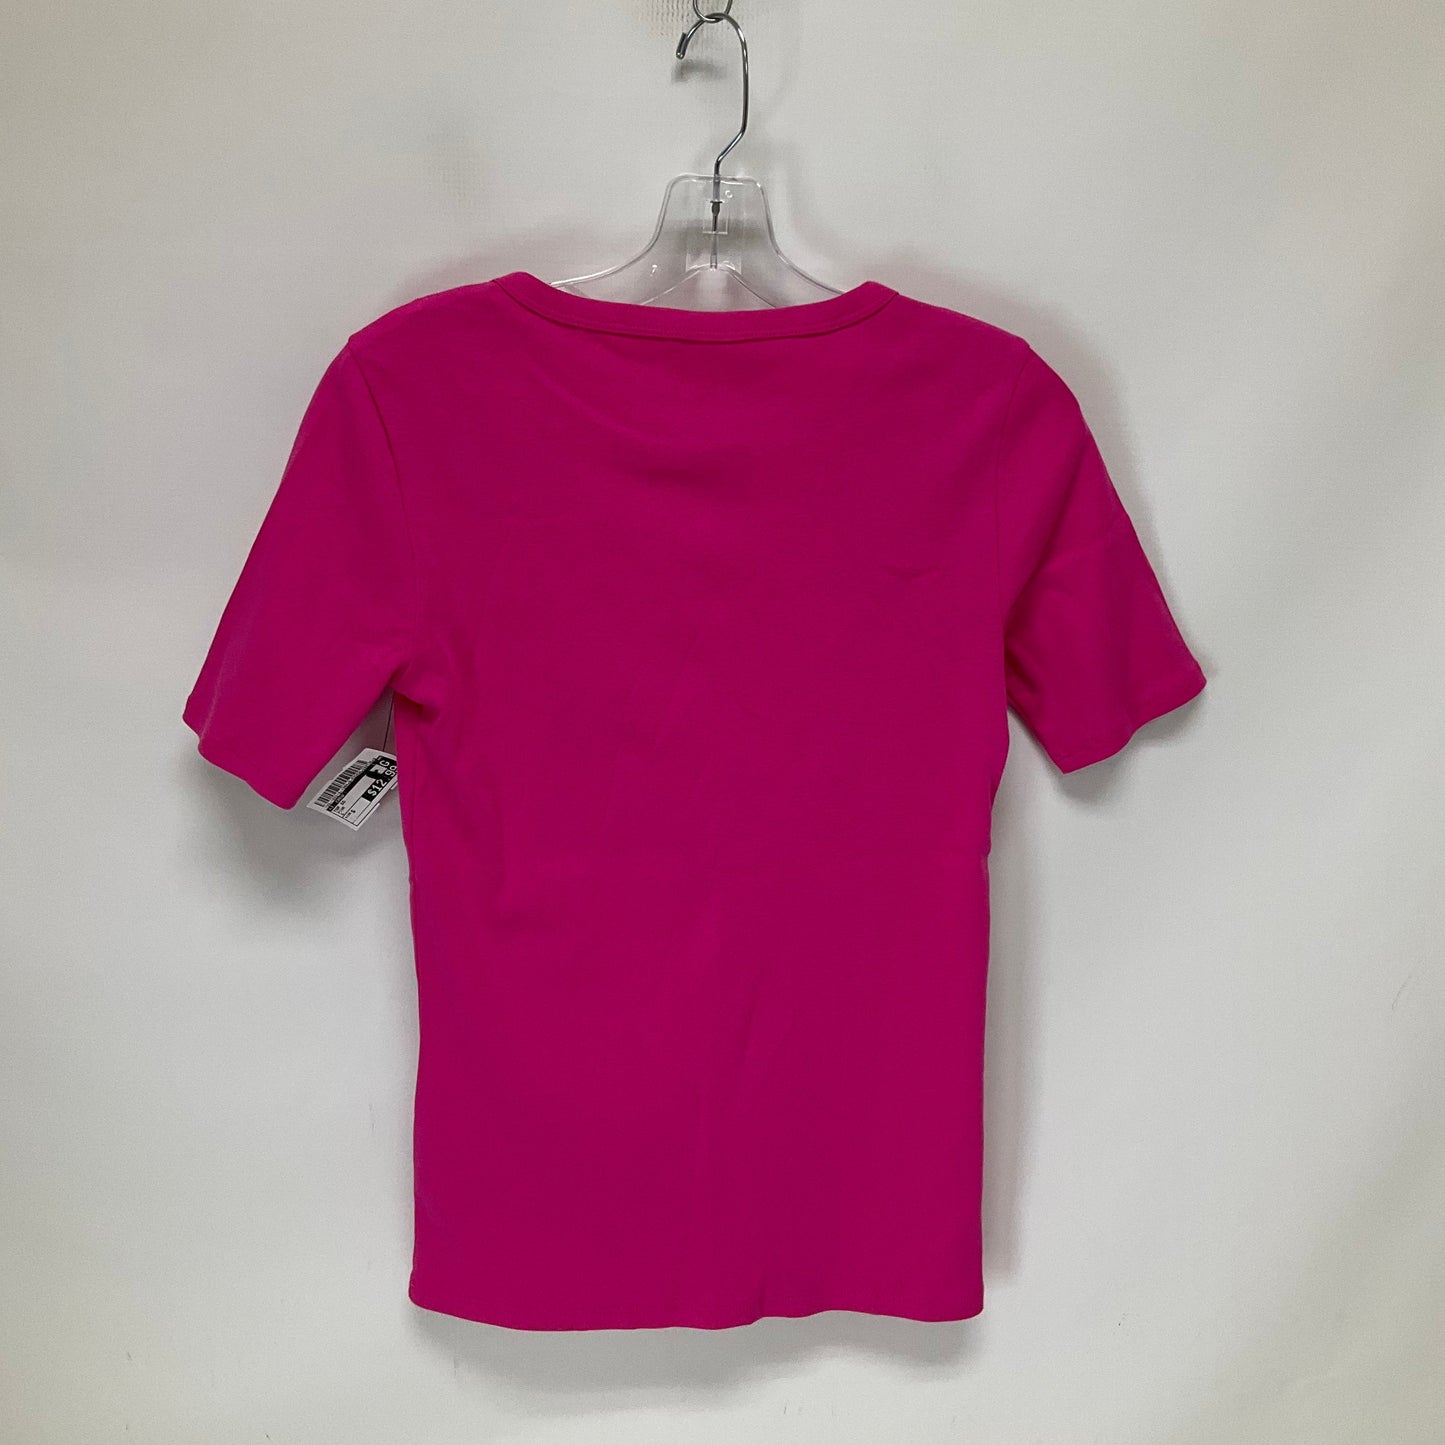 Pink Top Short Sleeve J. Crew, Size S